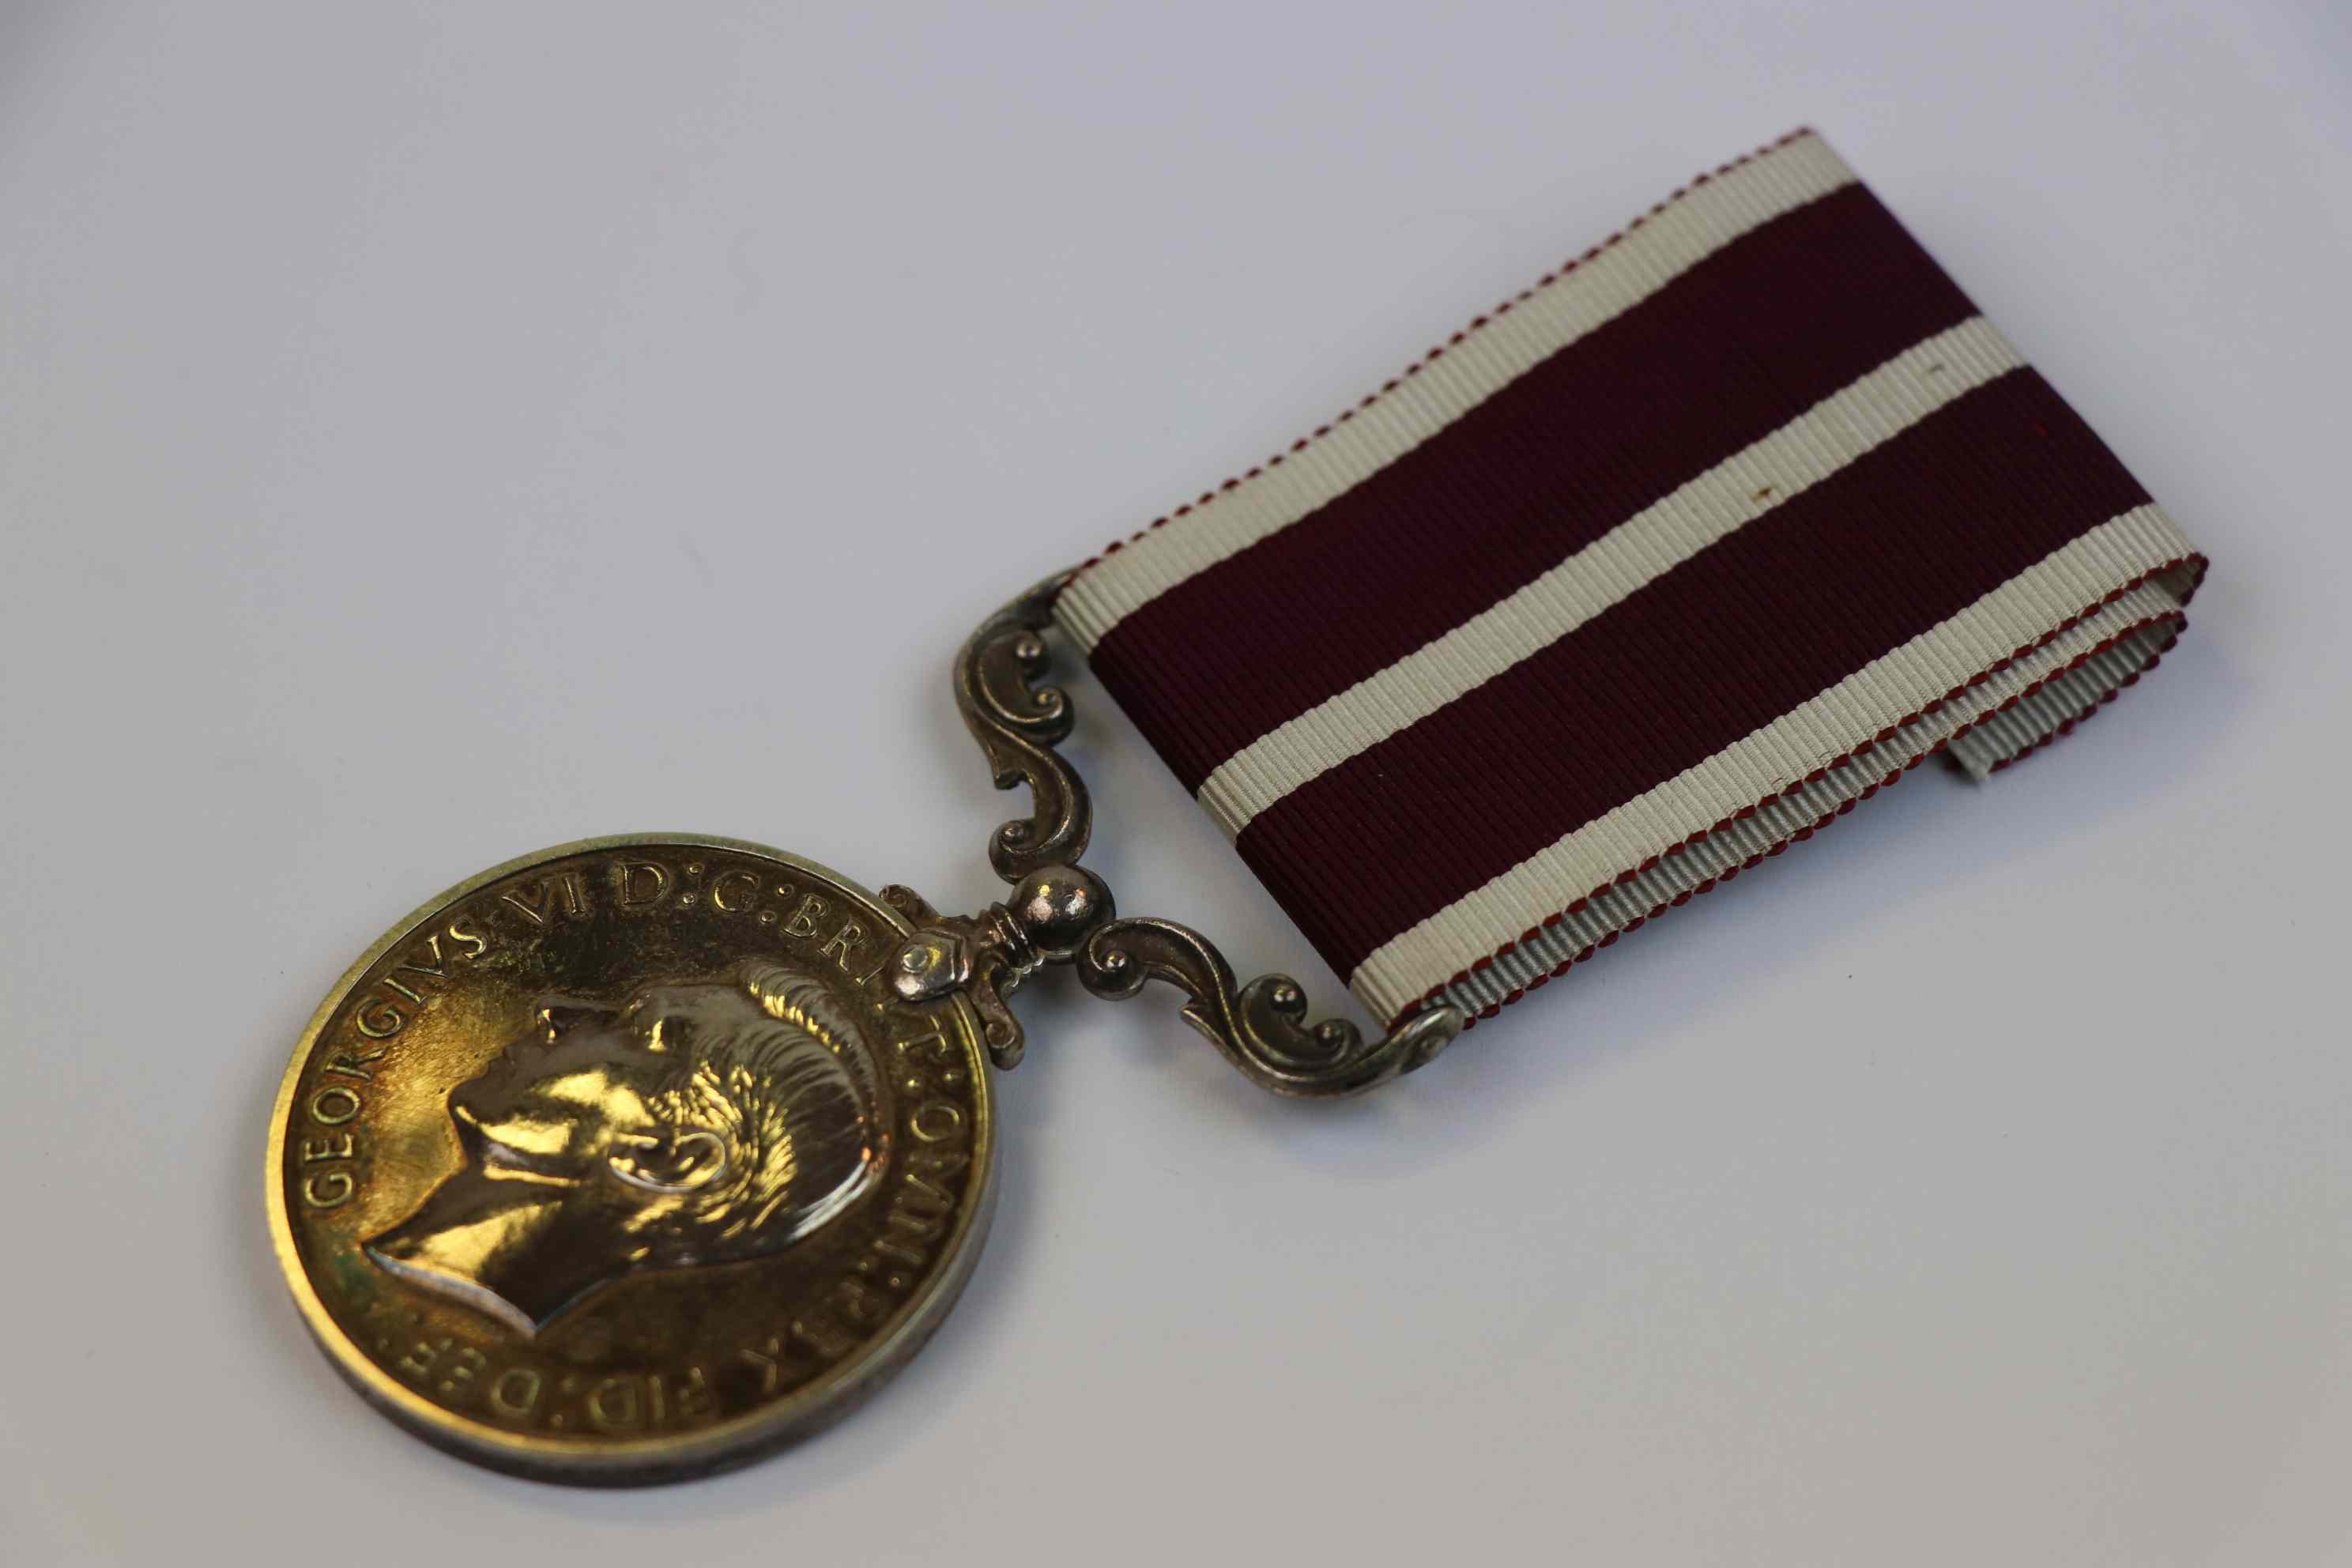 A Full Size King George VI British Army Meritorious Service Medal Issued To 4523853 SJT. J.W. ORAM - Image 5 of 11